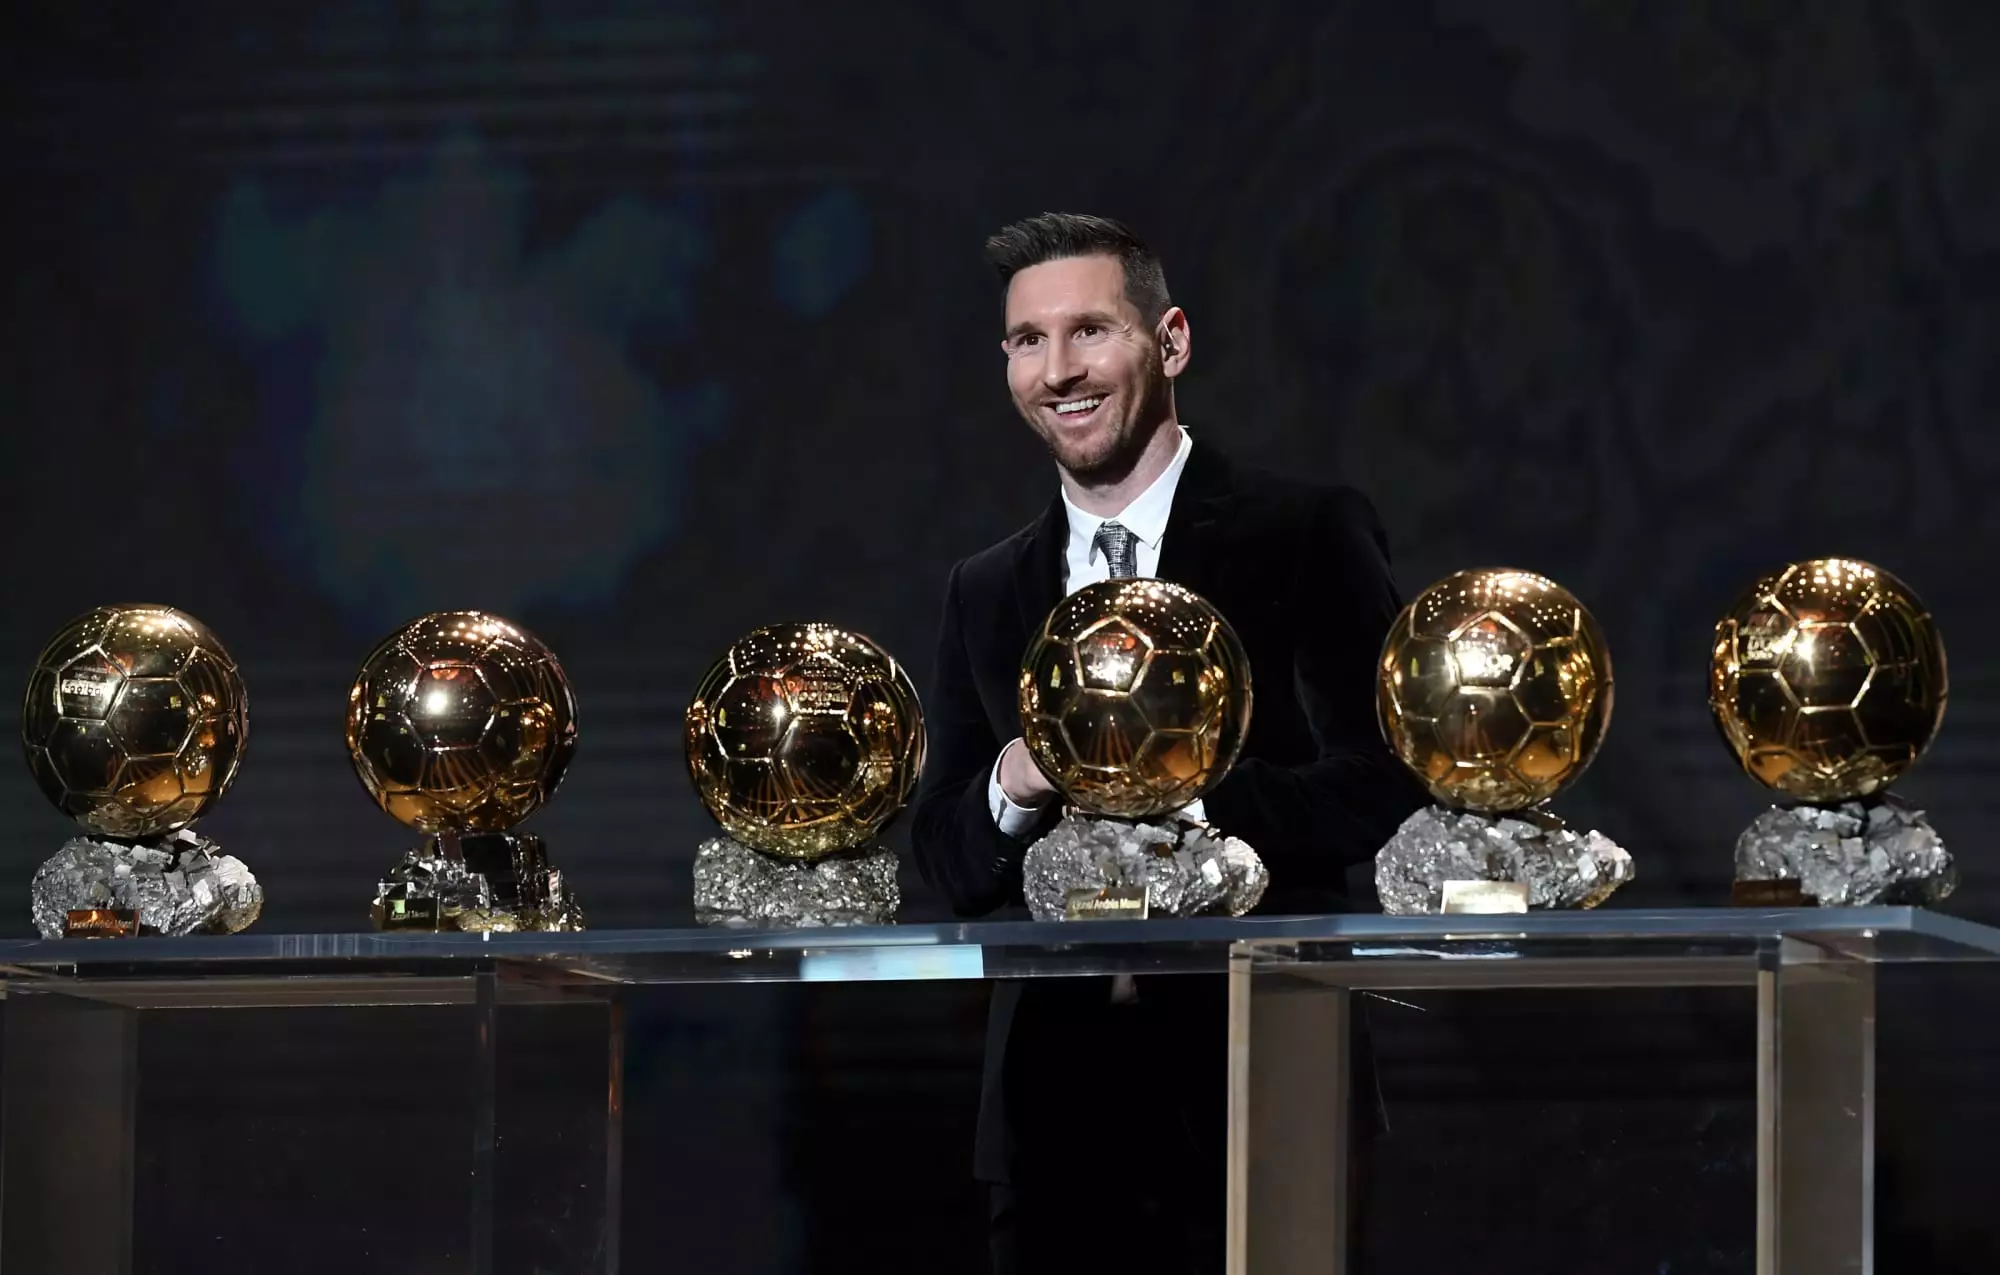 Lionel Messi is now the red hot favourite to scoop the Ballon d'Or award for a record seventh time (Image: PA)